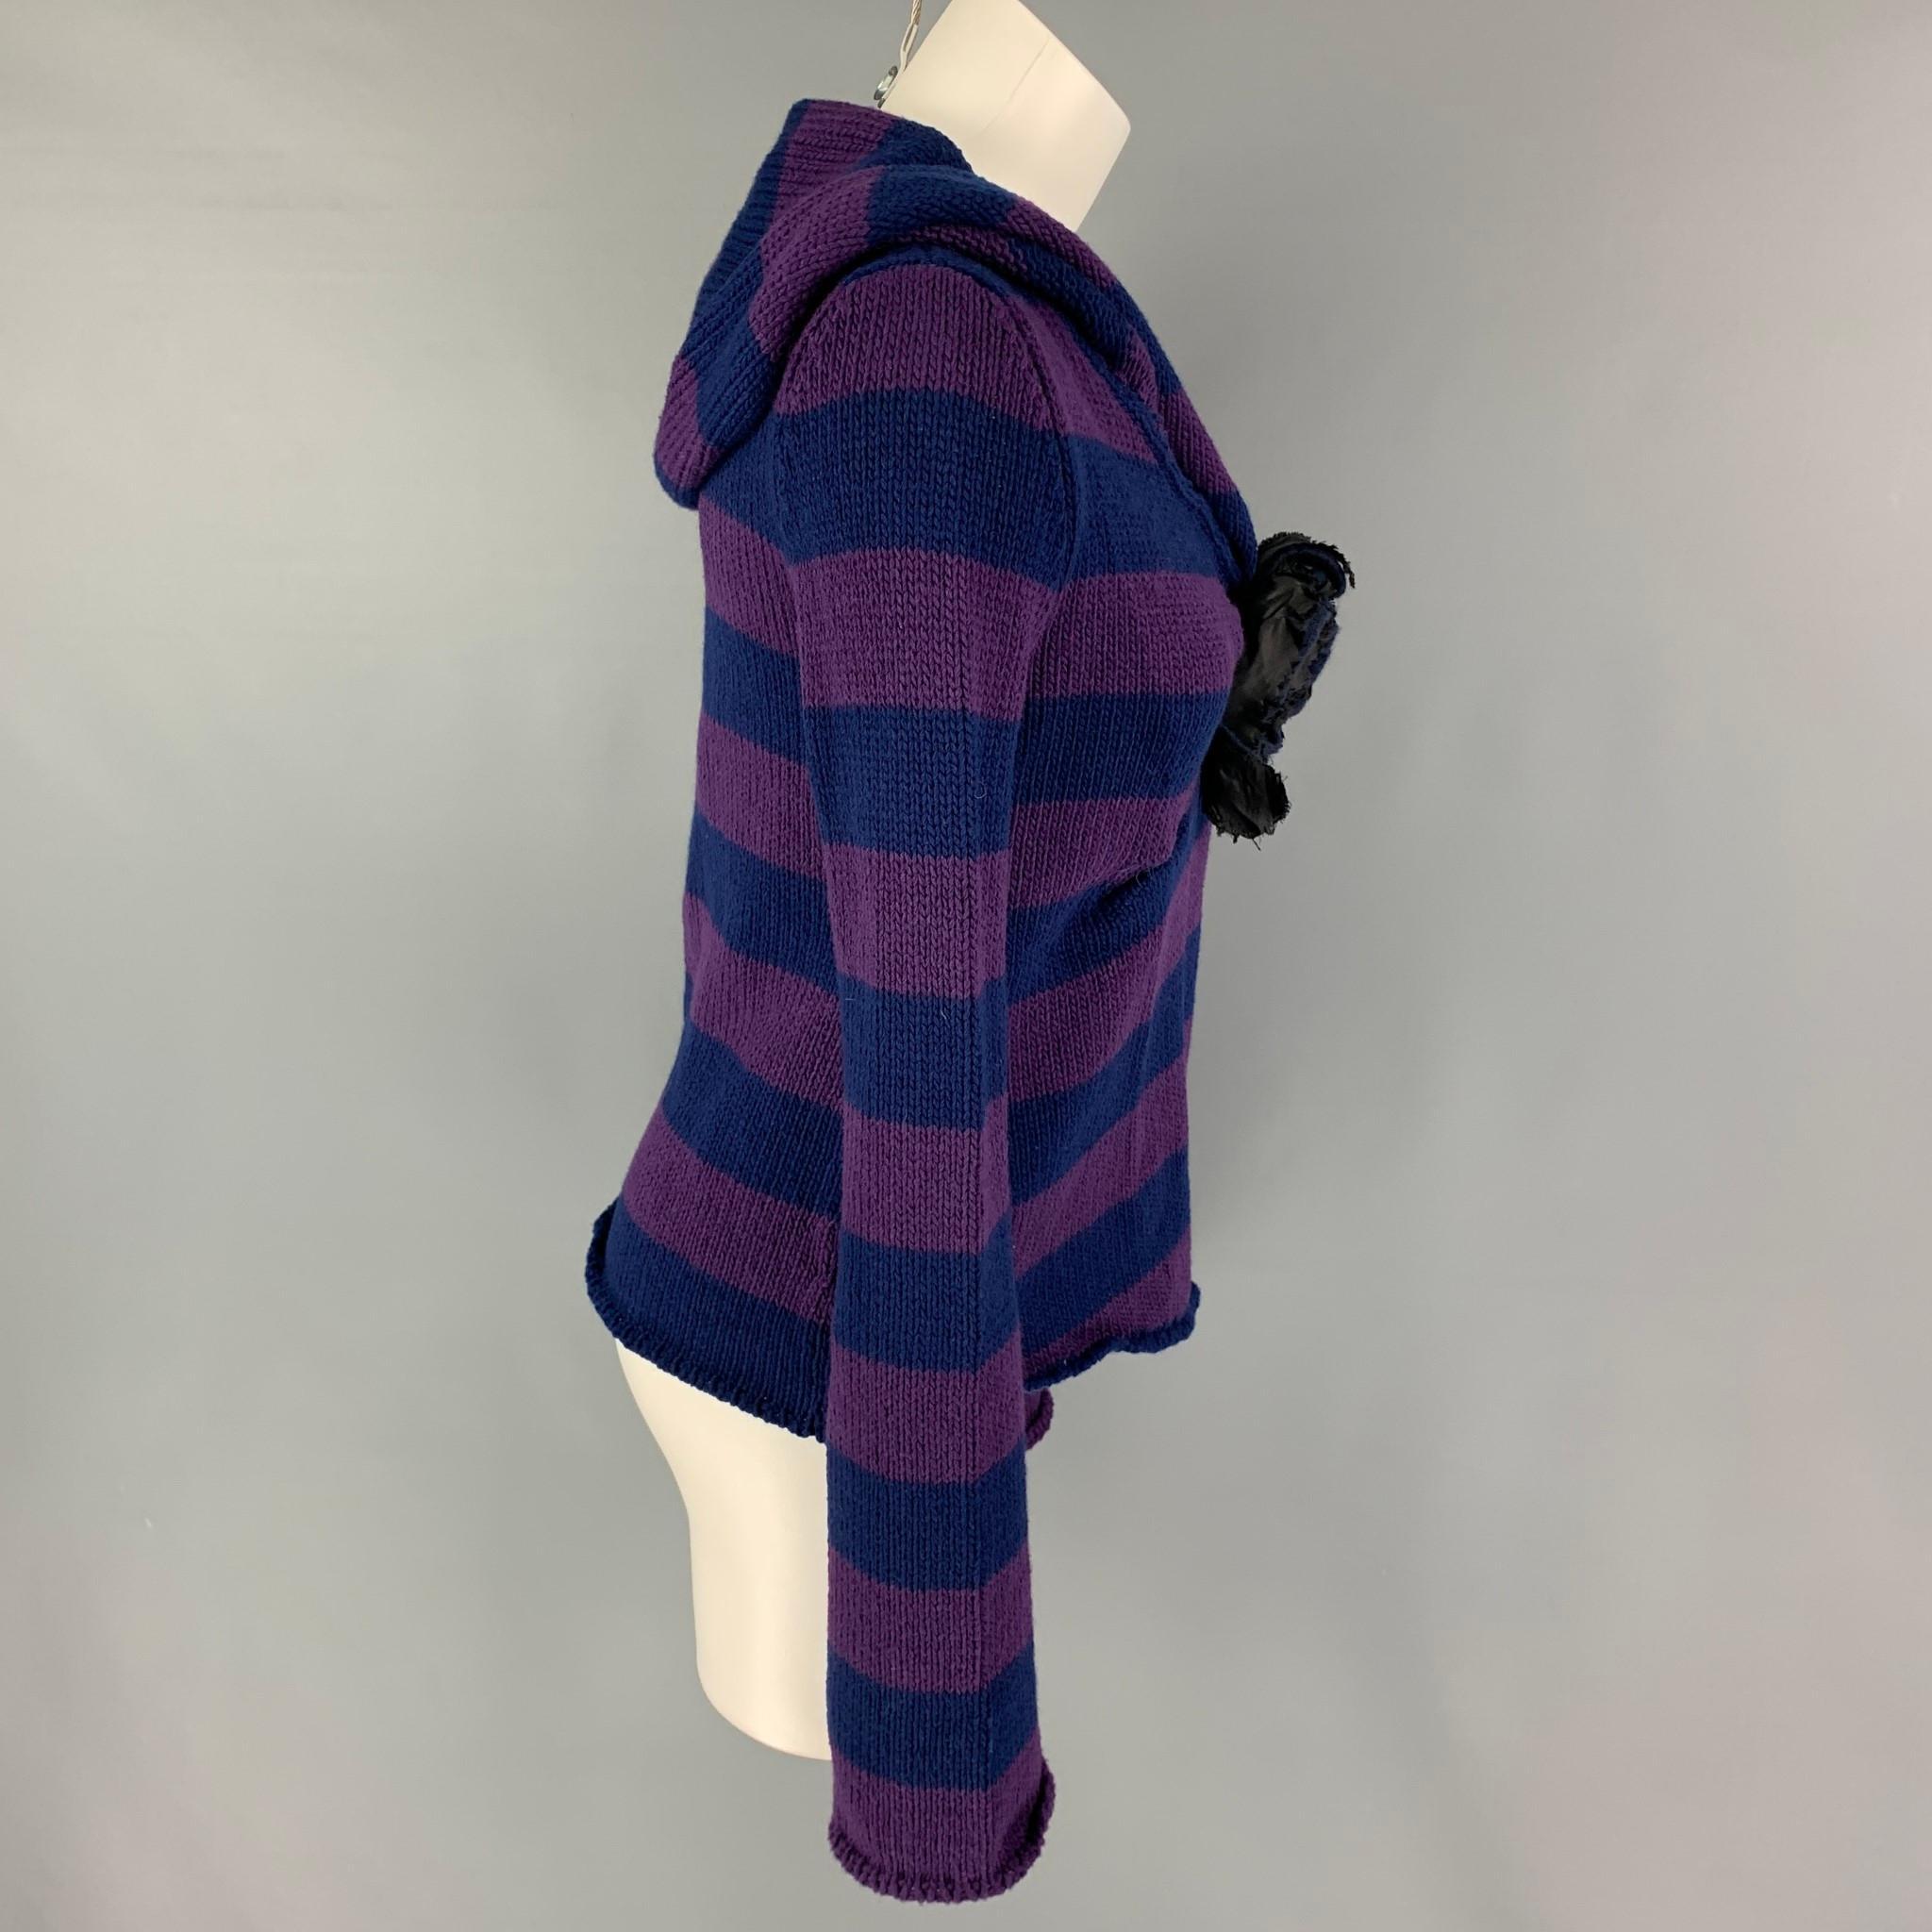 MARC JACOBS cardigan comes in a blue & purple knitted stripe wool / cashmere featuring a flower design and a snap button closure. Made in Italy. 

Very Good Pre-Owned Condition.
Marked: XS

Measurements:

Shoulder: 16 in/.
Bust: 34 in.
Sleeve: 29.5